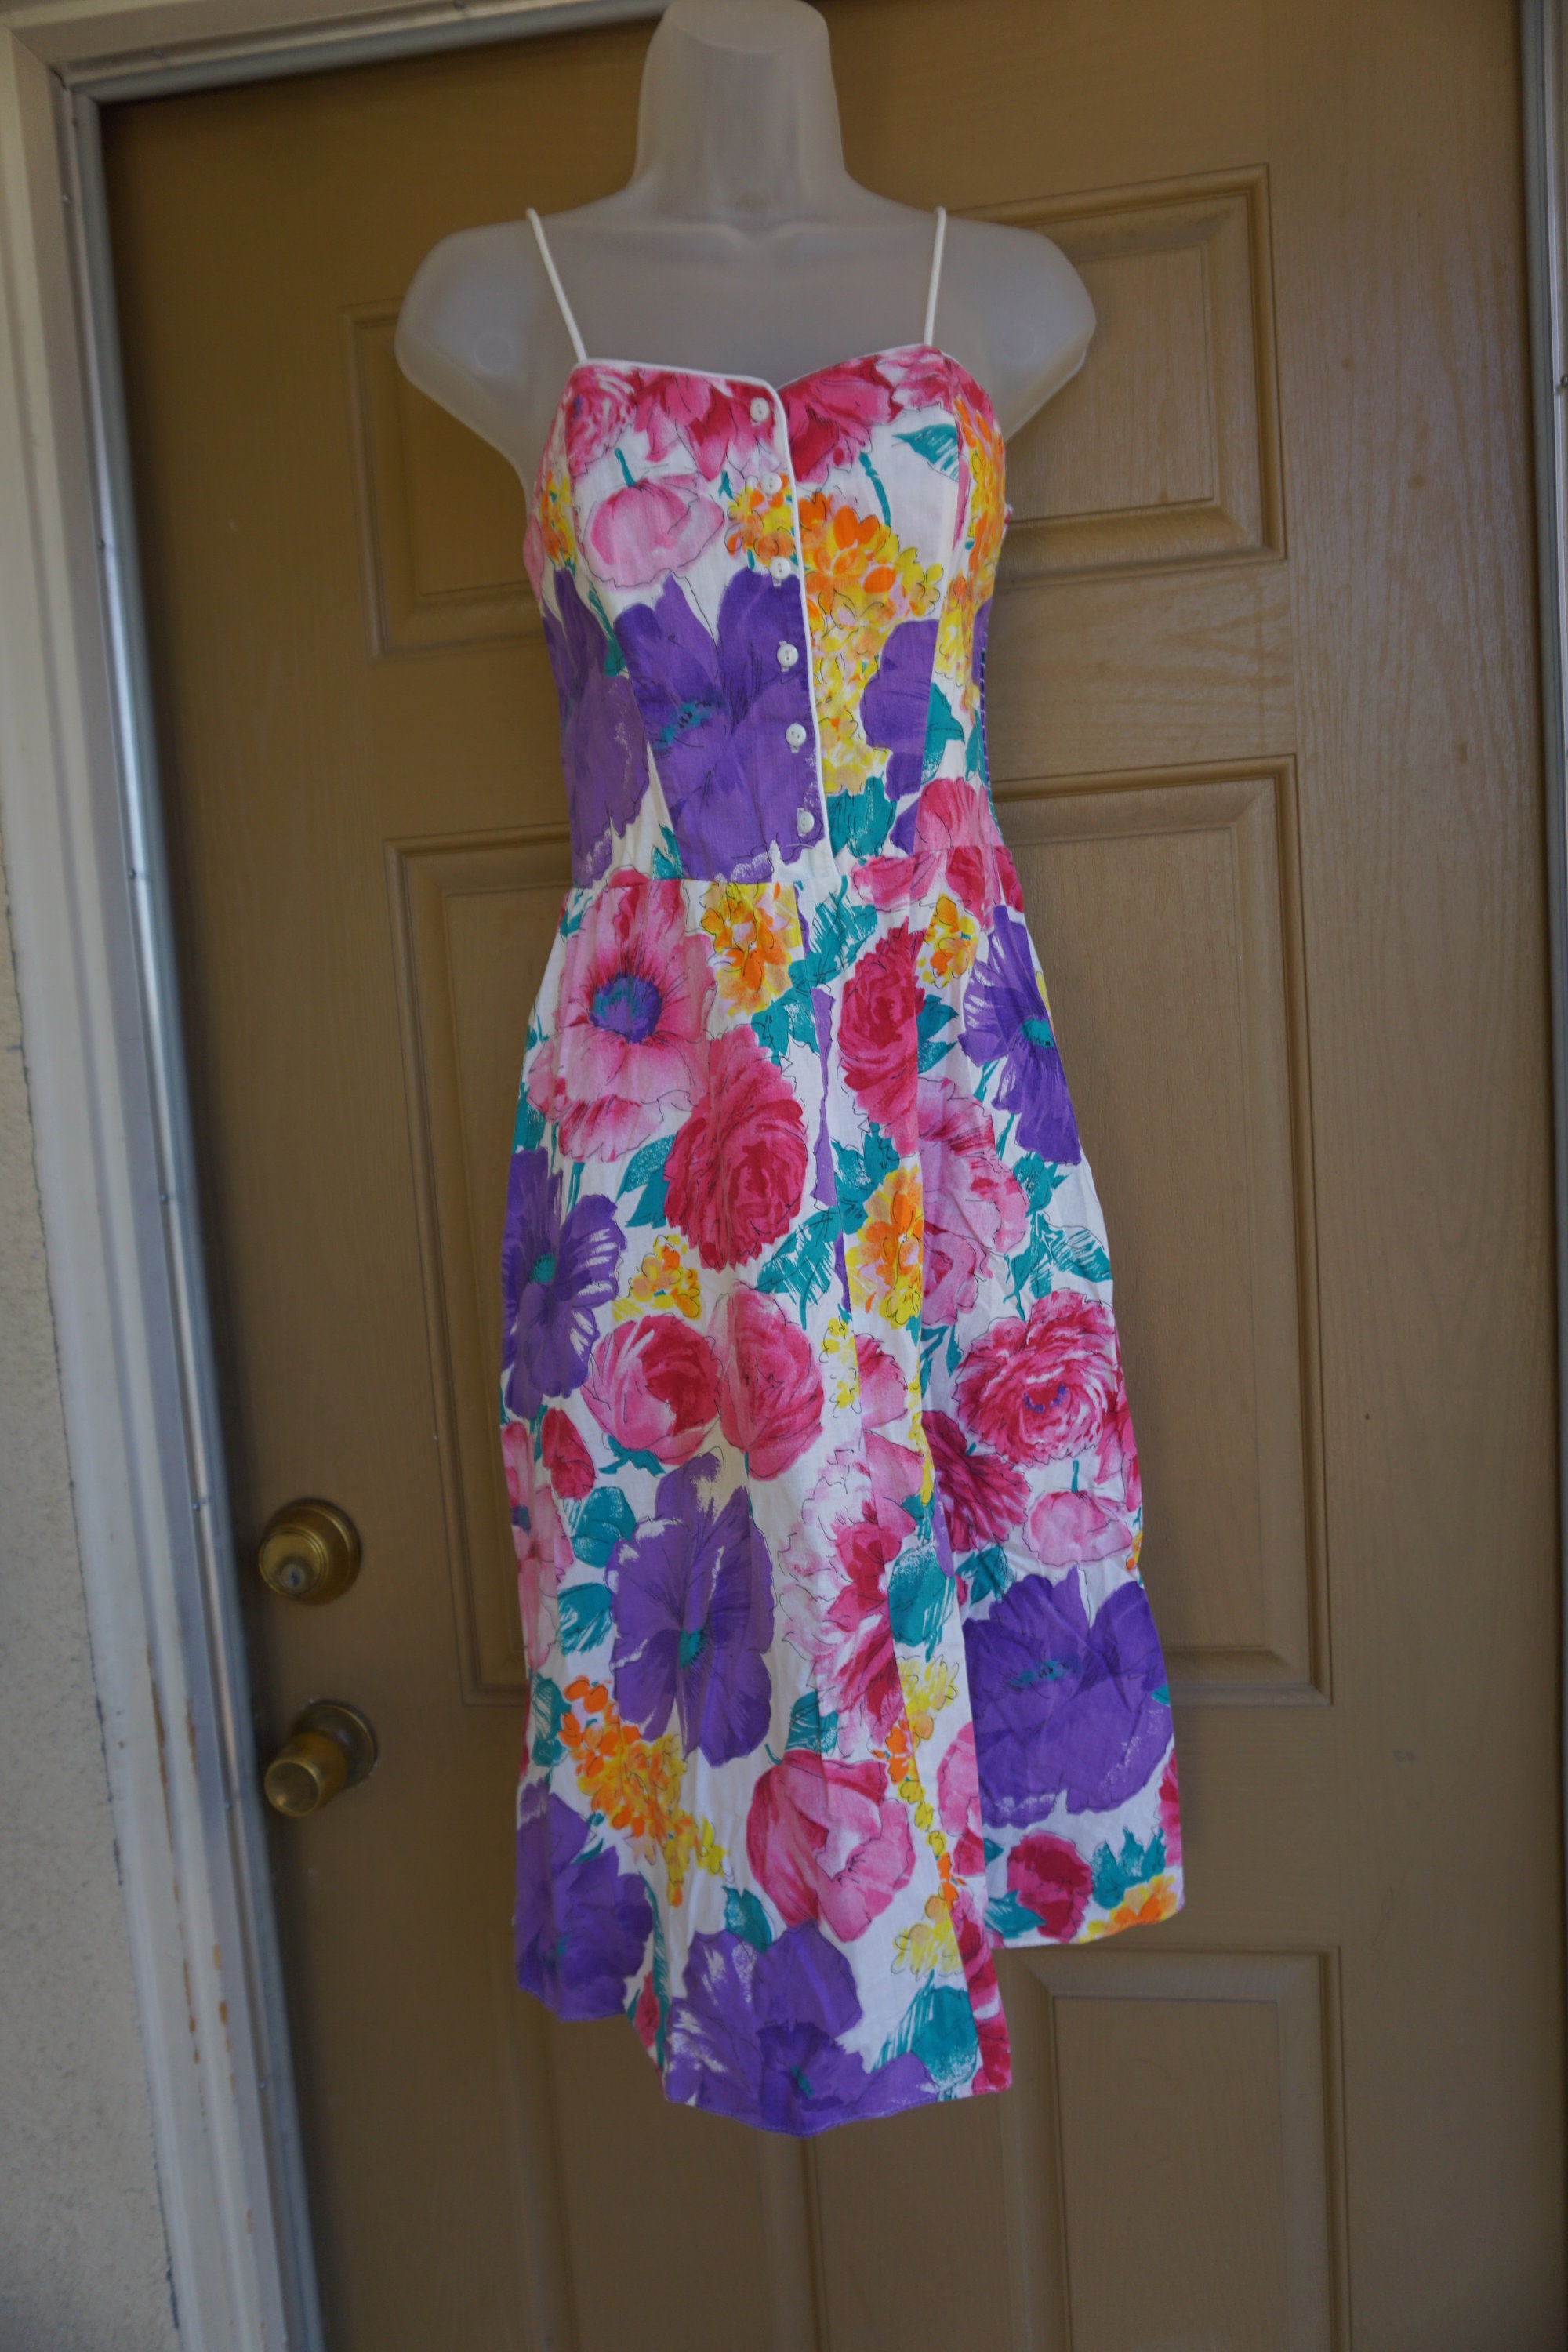 Vintage 80s 90s floral summer dress by Tabby of California | Etsy